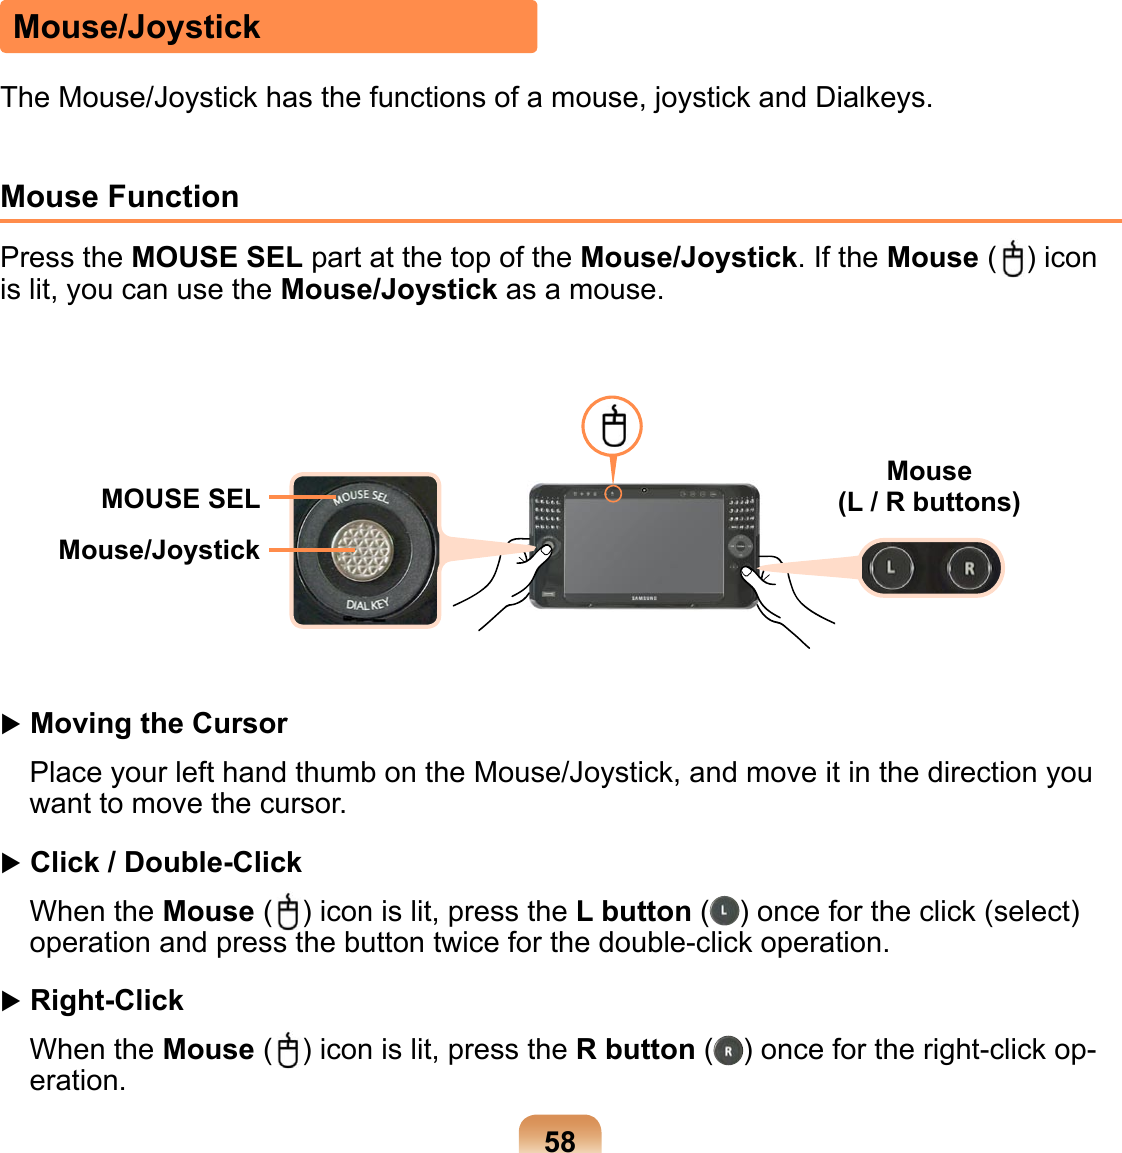 58Mouse/JoystickThe Mouse/Joystick has the functions of a mouse, joystick and Dialkeys.Mouse Function Press the MOUSE SEL part at the top of the Mouse/Joystick. If the Mouse ( ) icon is lit, you can use the Mouse/Joystick as a mouse.MOUSE SEL Mouse  (L / R buttons)Mouse/Joystick Moving the CursorPlace your left hand thumb on the Mouse/Joystick, and move it in the direction you want to move the cursor.  Click / Double-Click When the Mouse ( ) icon is lit, press the L button ( ) once for the click (select) operation and press the button twice for the double-click operation.  Right-Click When the Mouse ( ) icon is lit, press the R button ( ) once for the right-click op-eration.